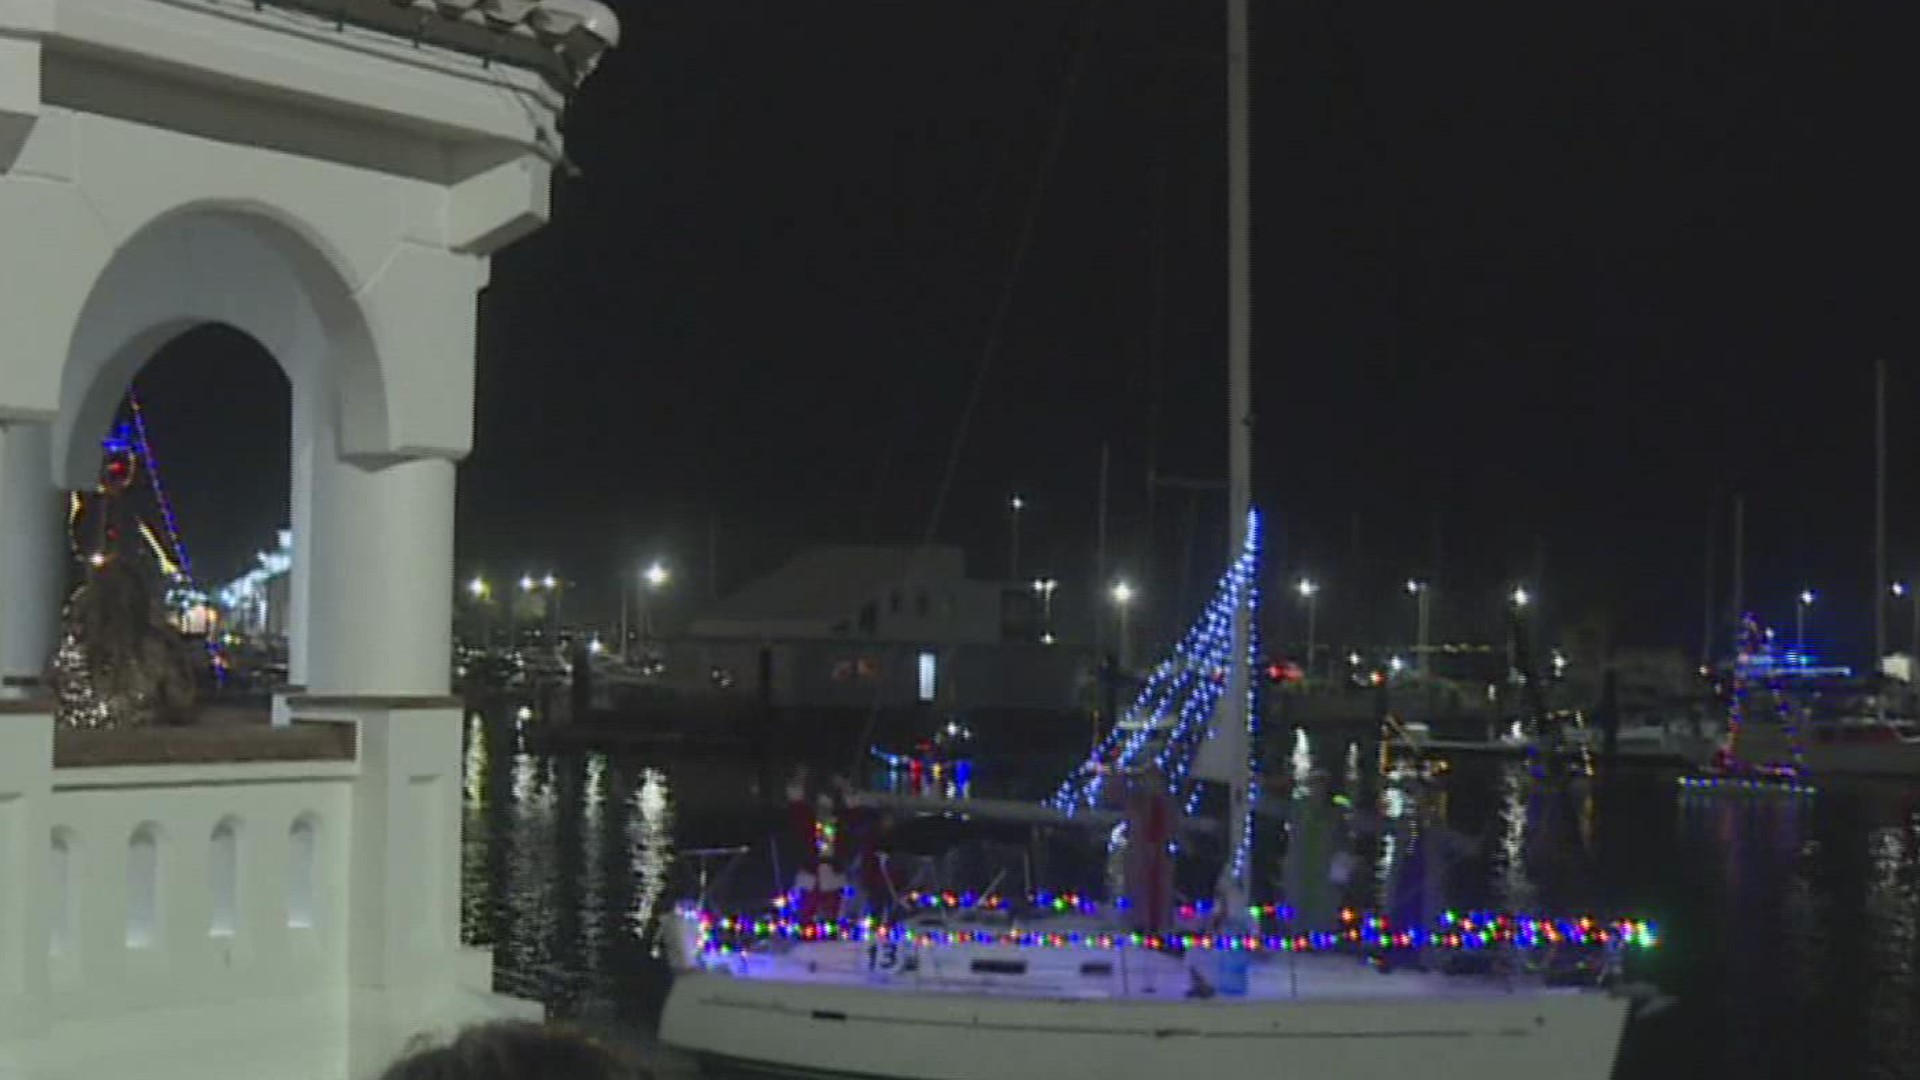 Holiday cheer was definitely in the air and on the water as the cheerful parade lit up the marina and the faces of numerous residents.